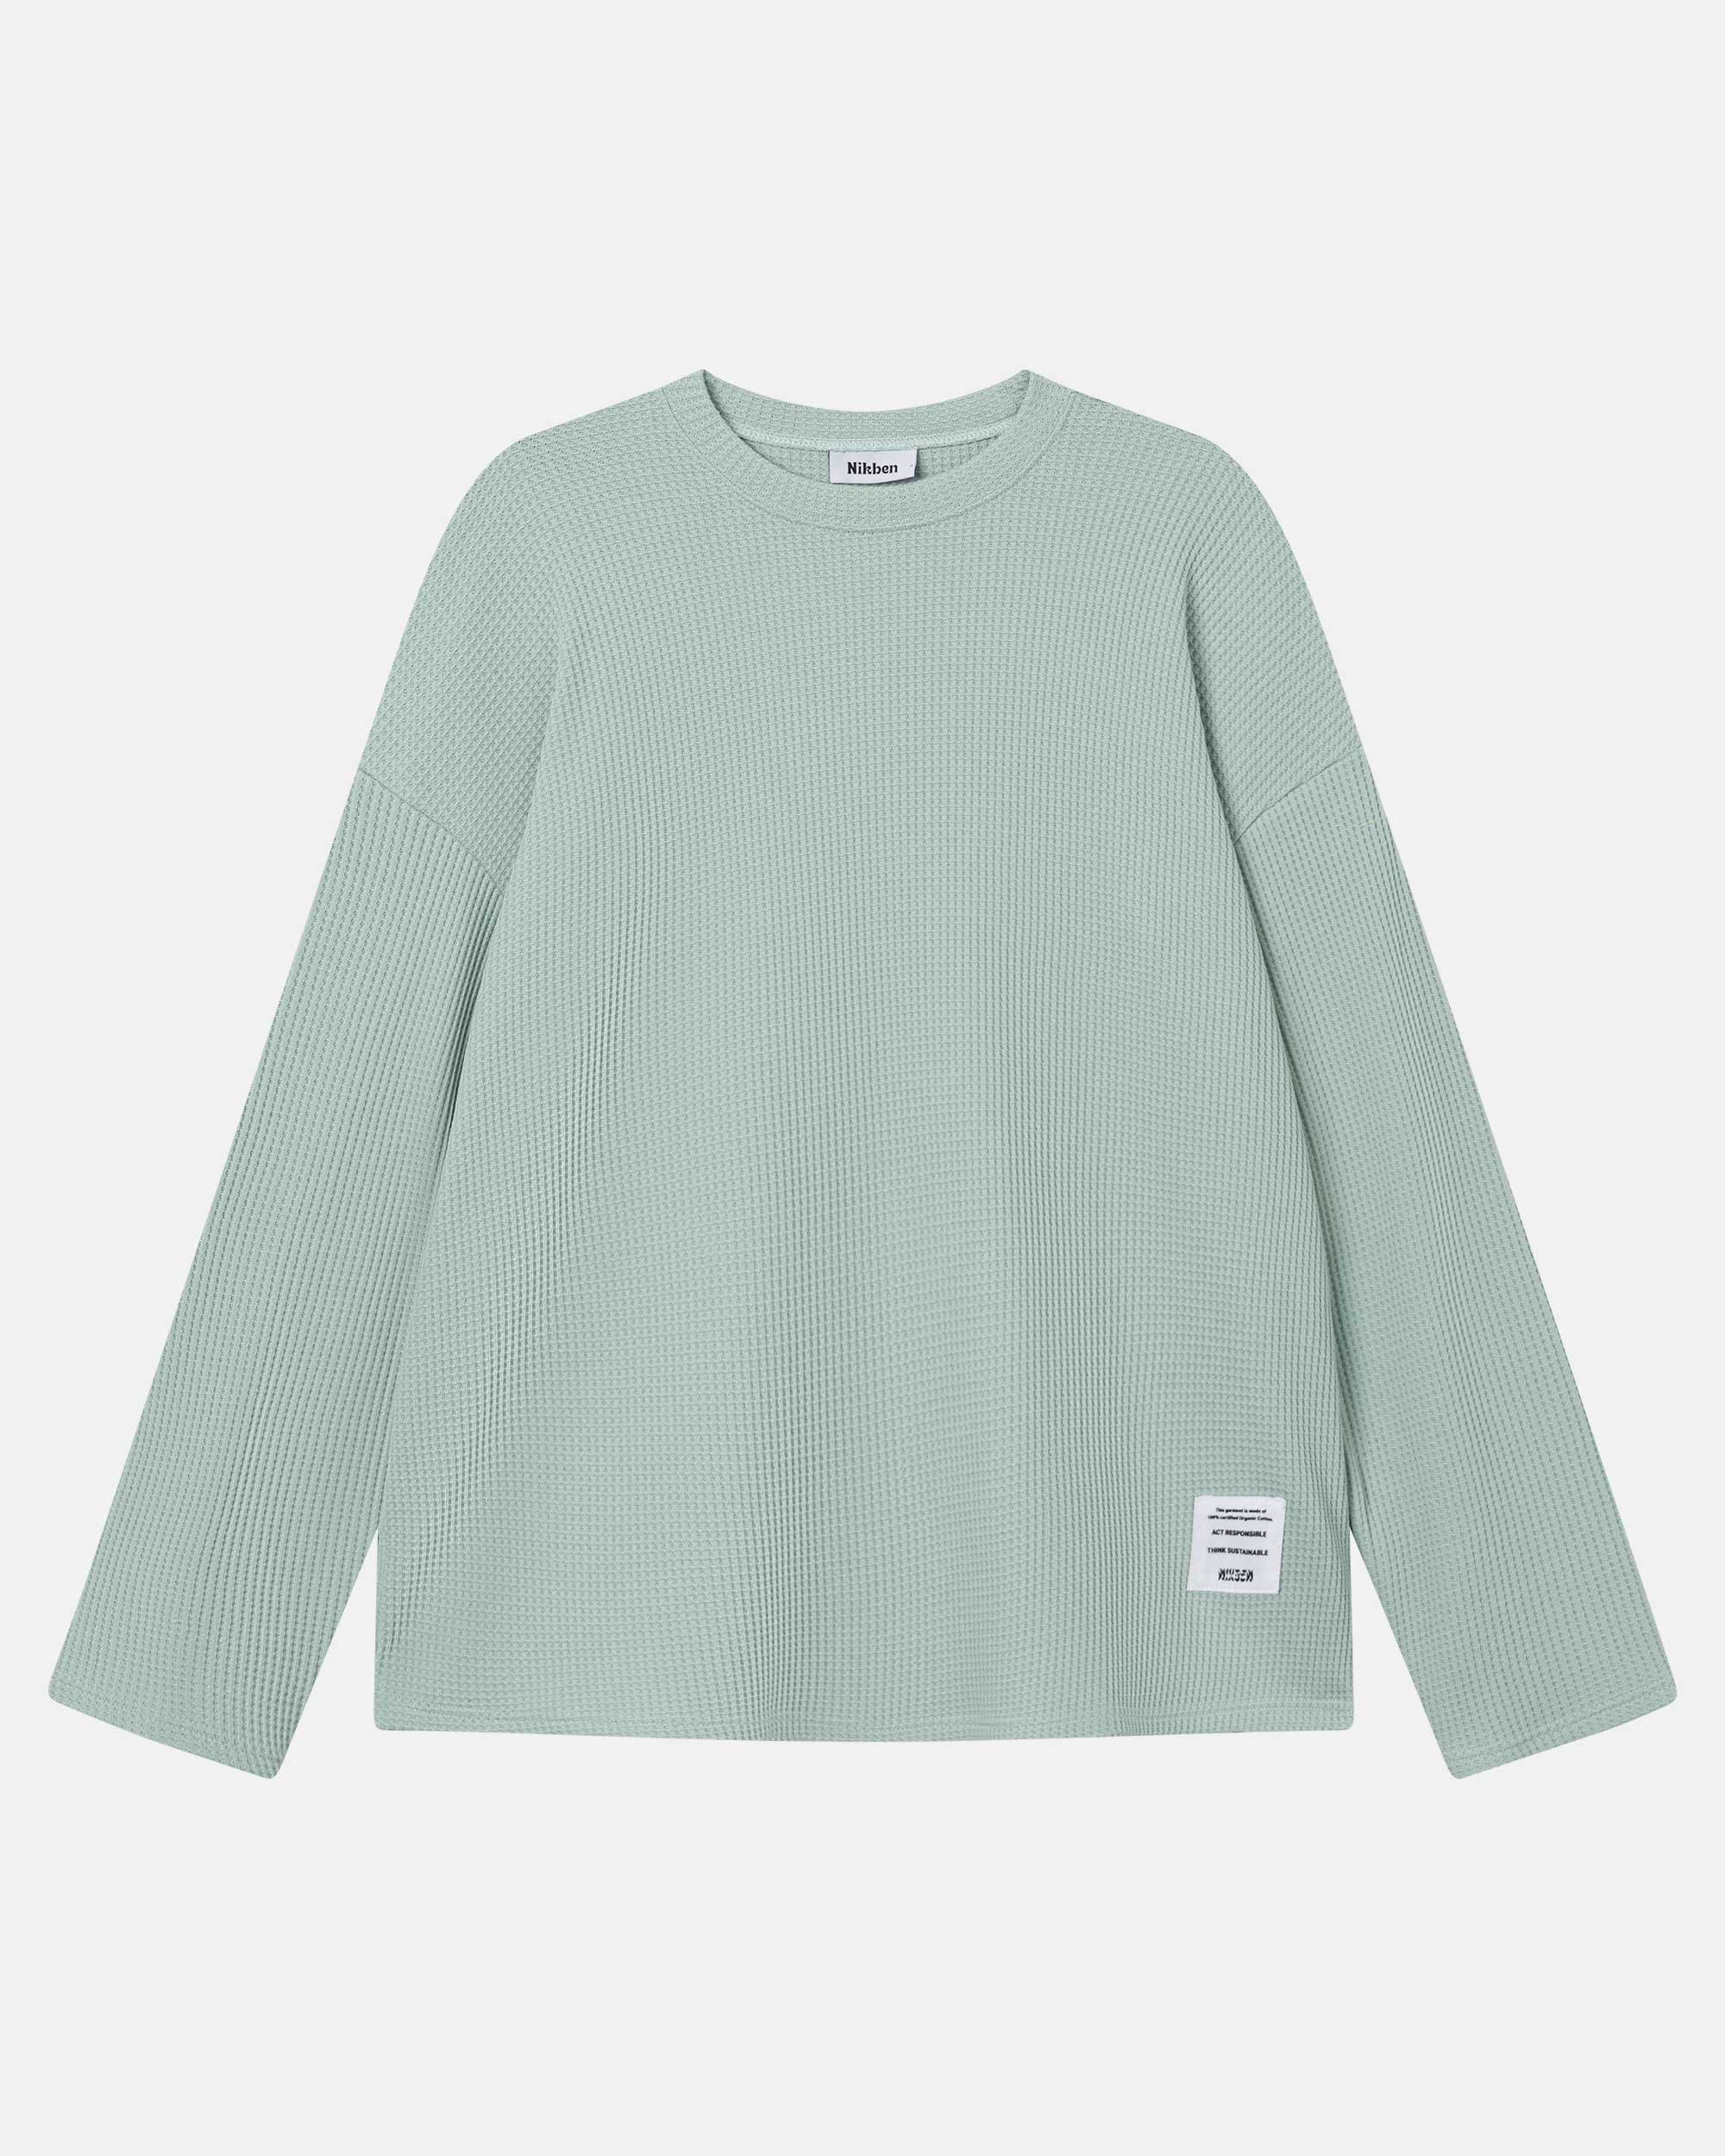 Mint green waffle-patterned sweatshirt with a stitched-on material label.